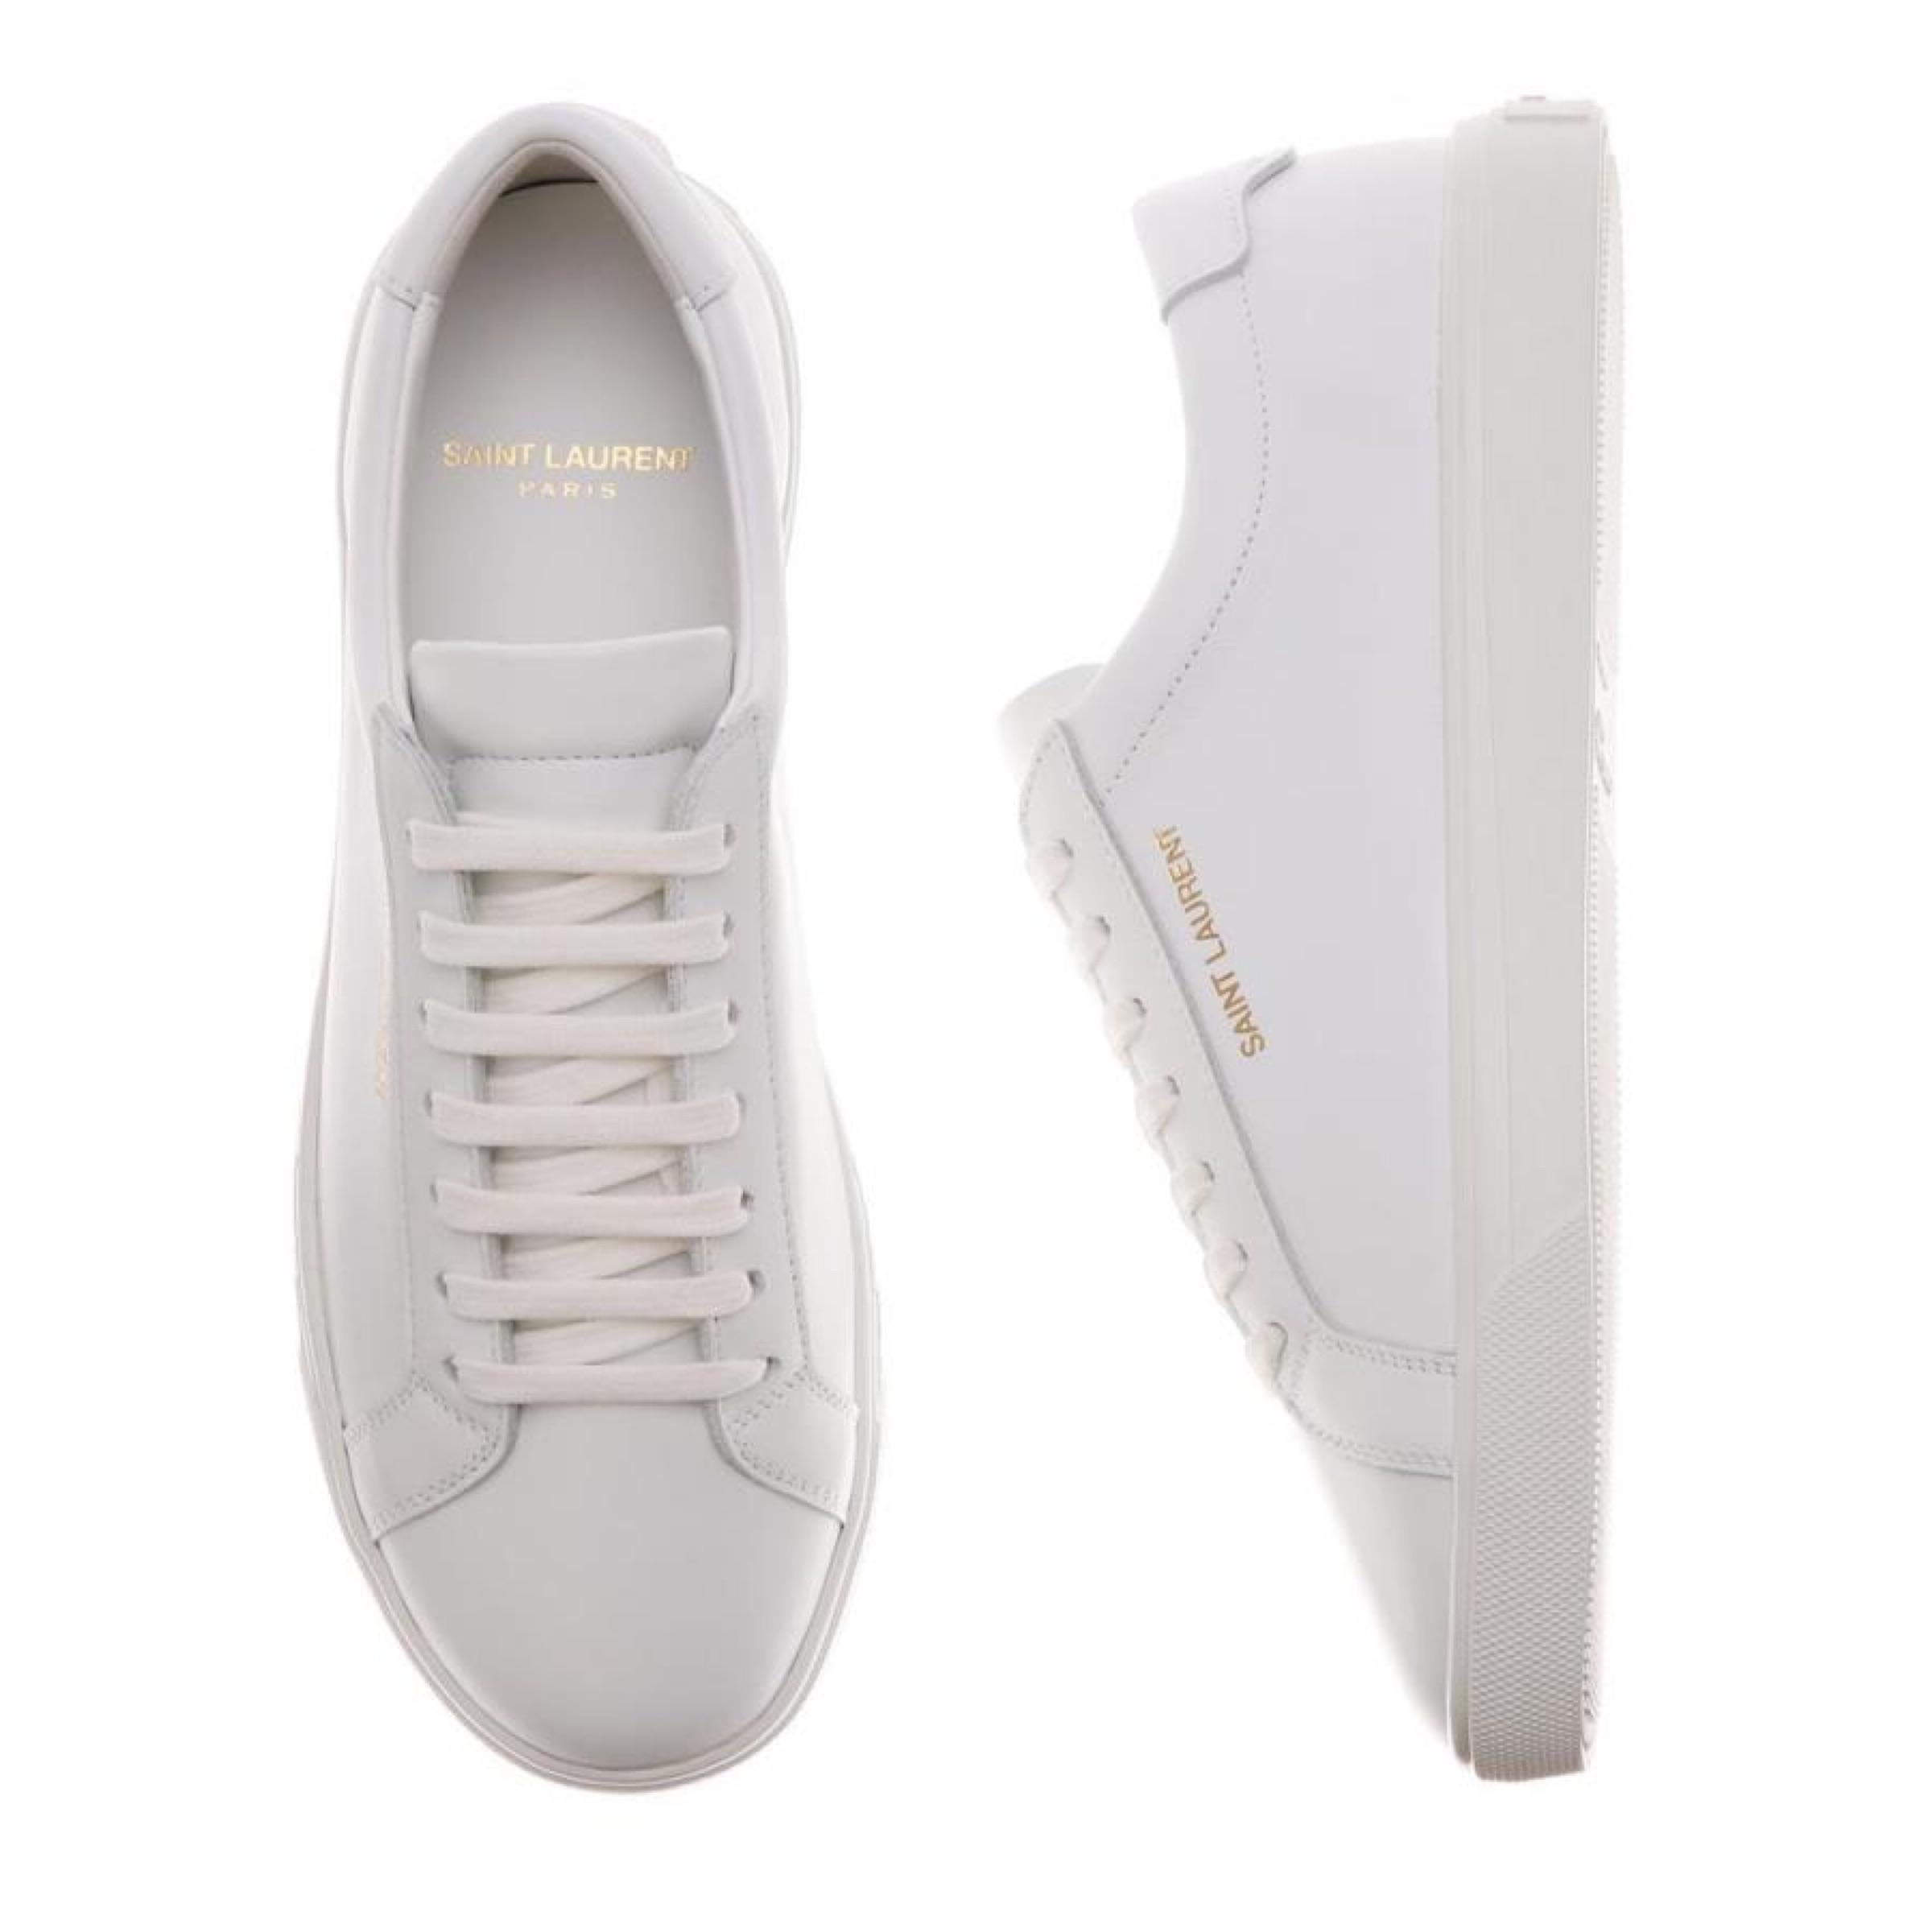 NEW Saint Laurent White Andy Leather Sneakers Size 39.5 EU 9.5 US 1